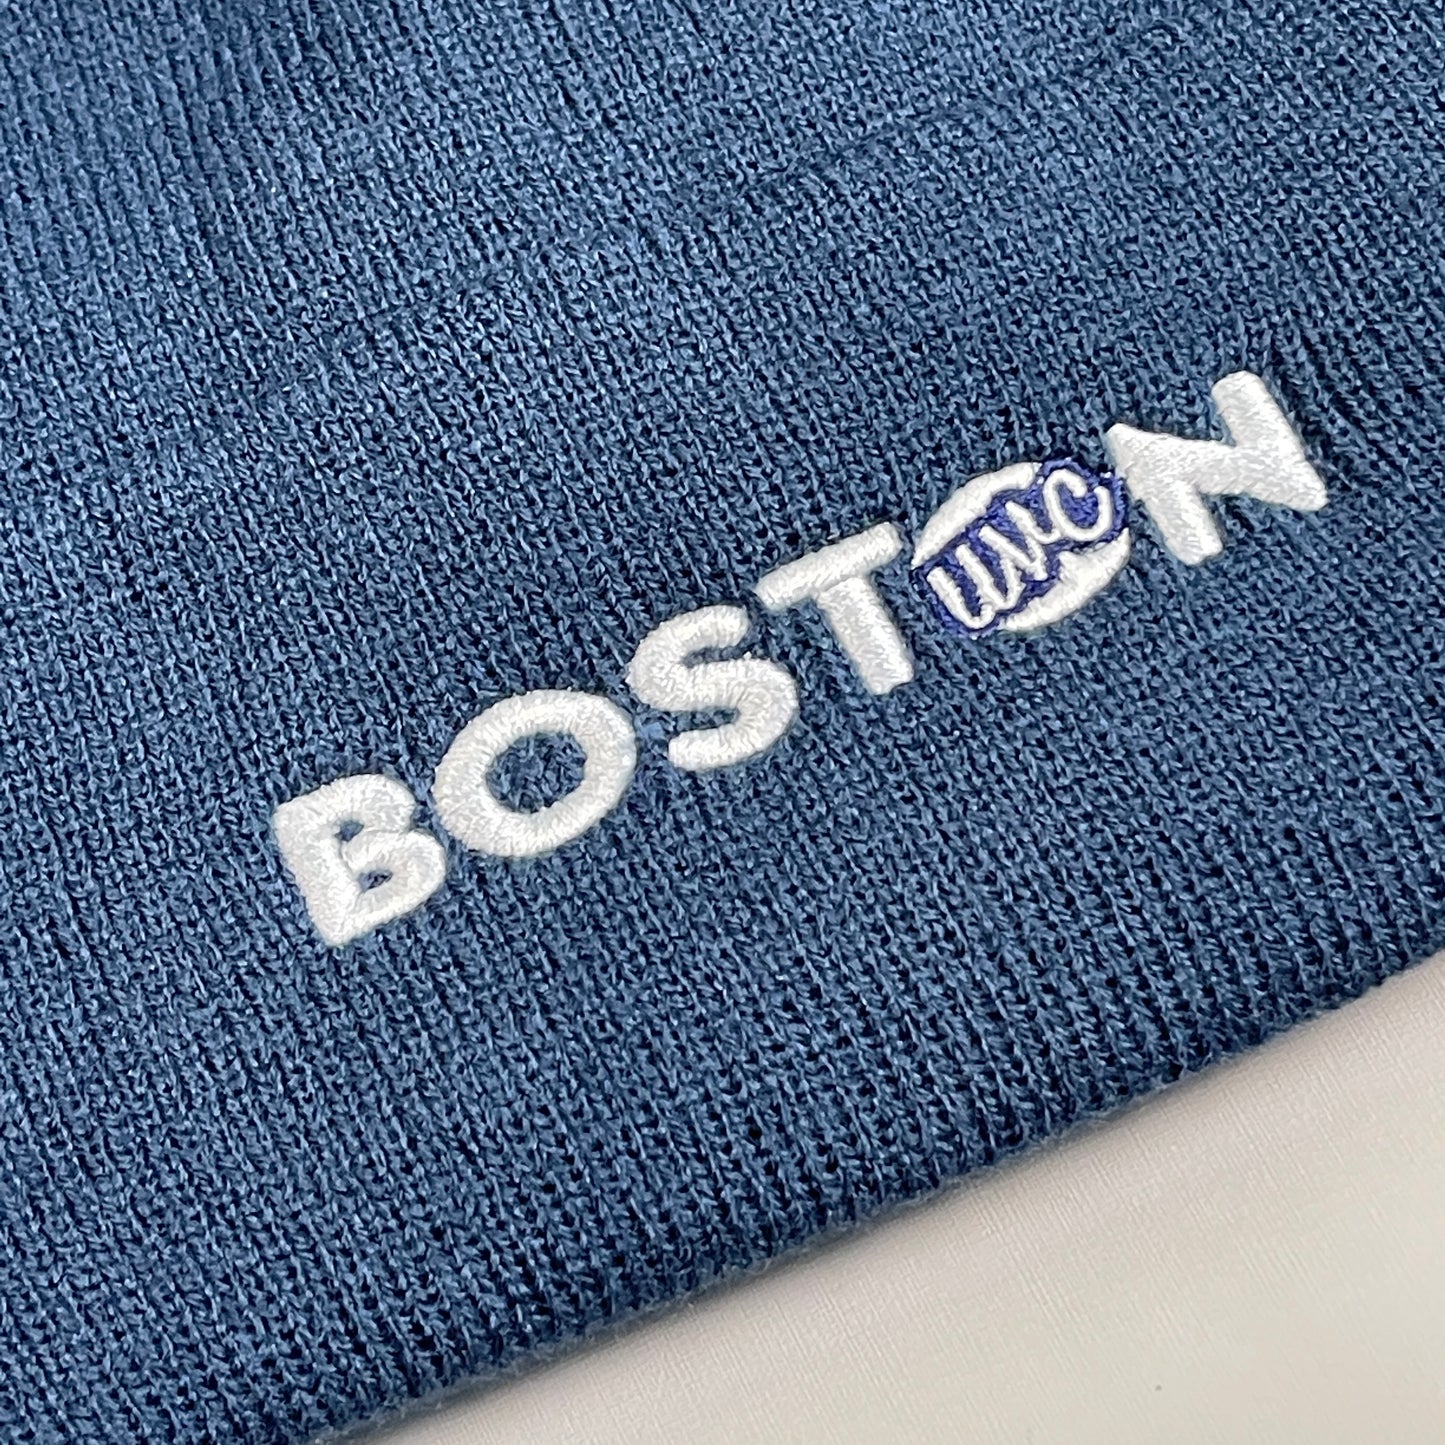 BOSTON UVC Knit Cuff Beanie Embroidered Hat by PORT AUTHORITY Blue (New)